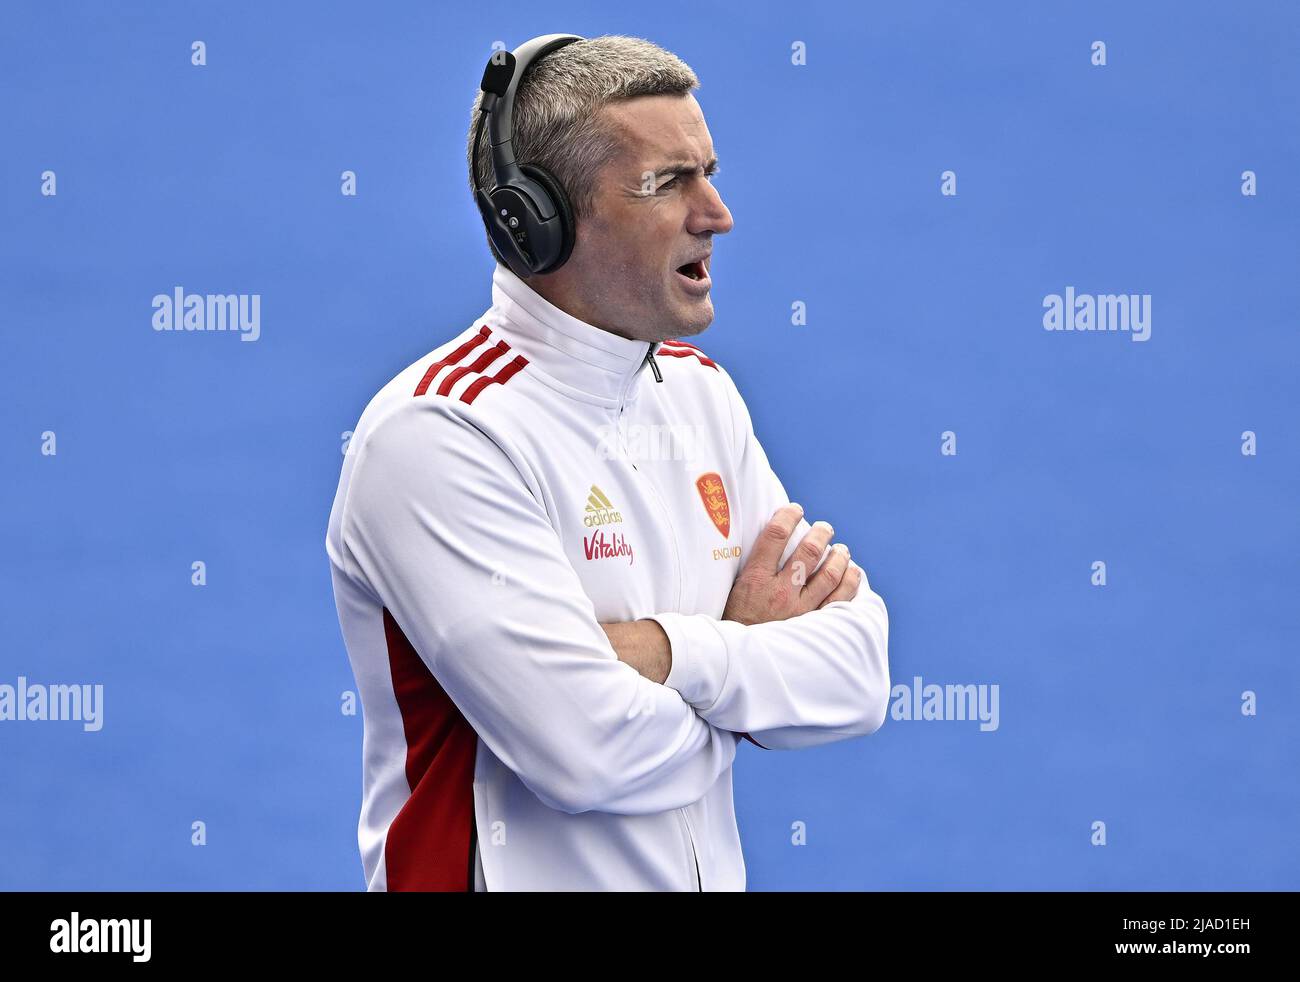 Stratford, United Kingdom. 29th May, 2022. England V Spain Womens FIH Pro League. Lee Valley Hockey centre. Stratford. David Ralph (England coach) during the England V Spain Womens FIH Pro League hockey match. Credit: Sport In Pictures/Alamy Live News Stock Photo